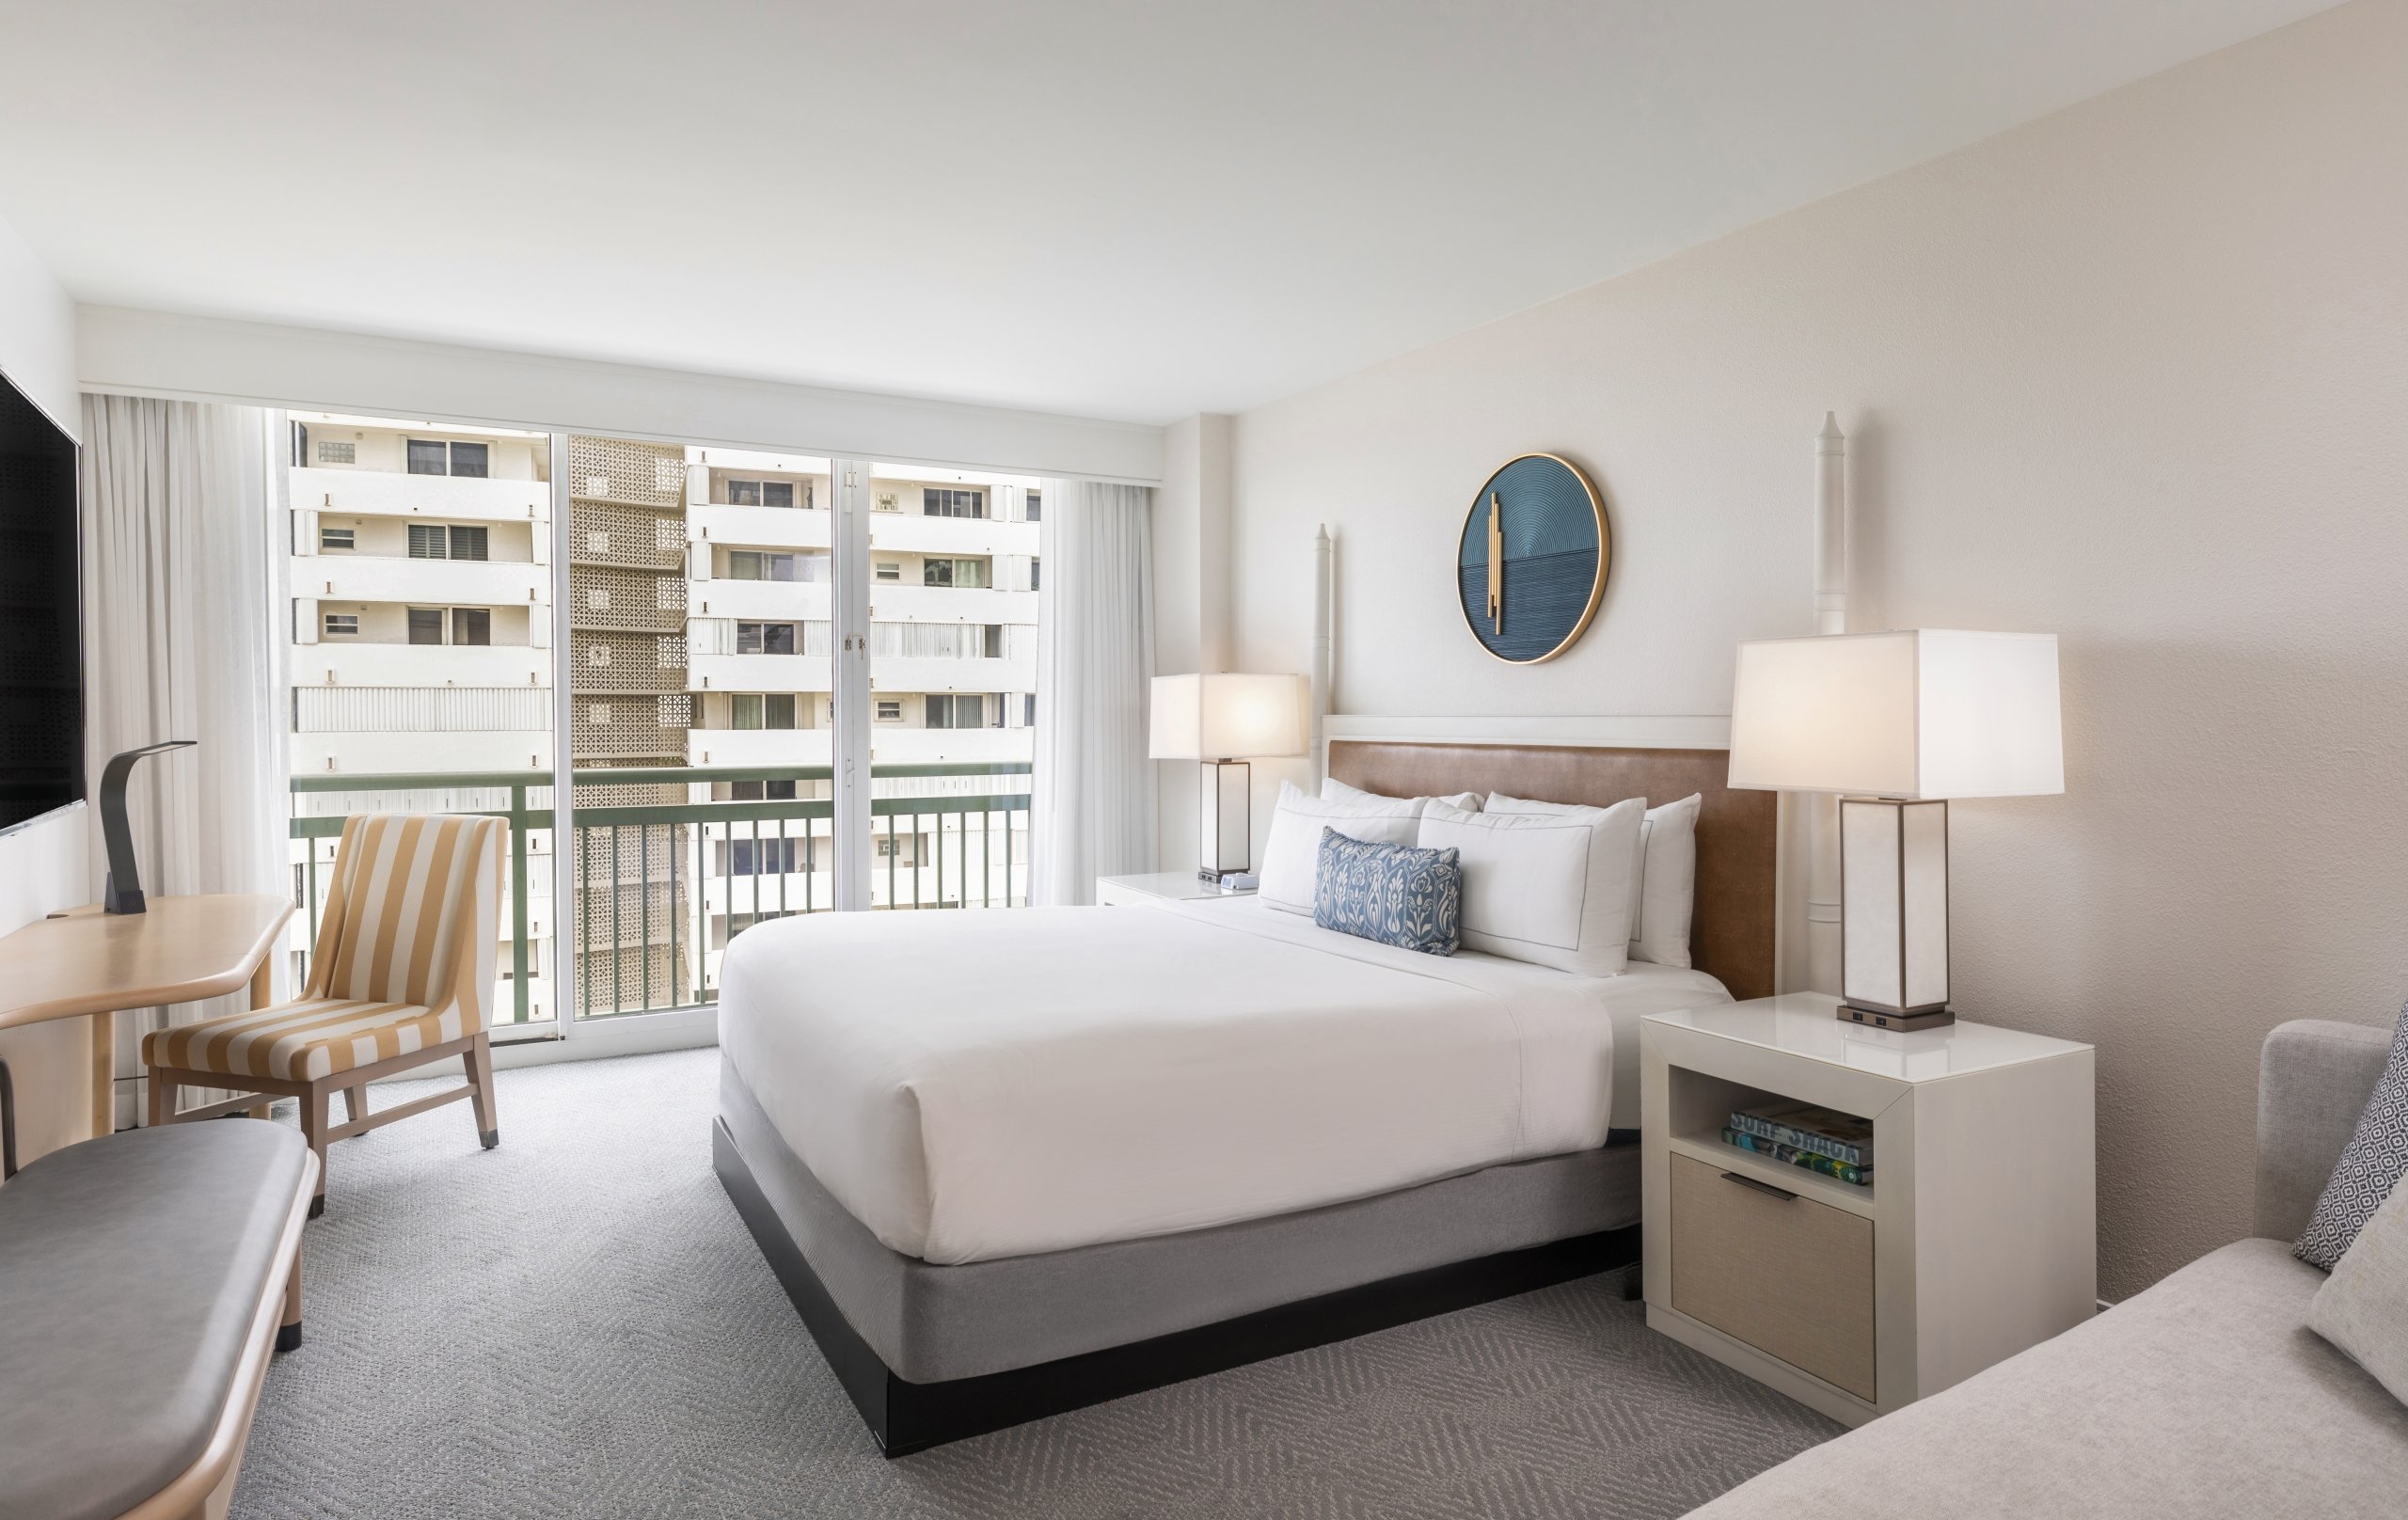 Spacious guest room with panoramic views and elegant decor at West Palm Beach Hotel.